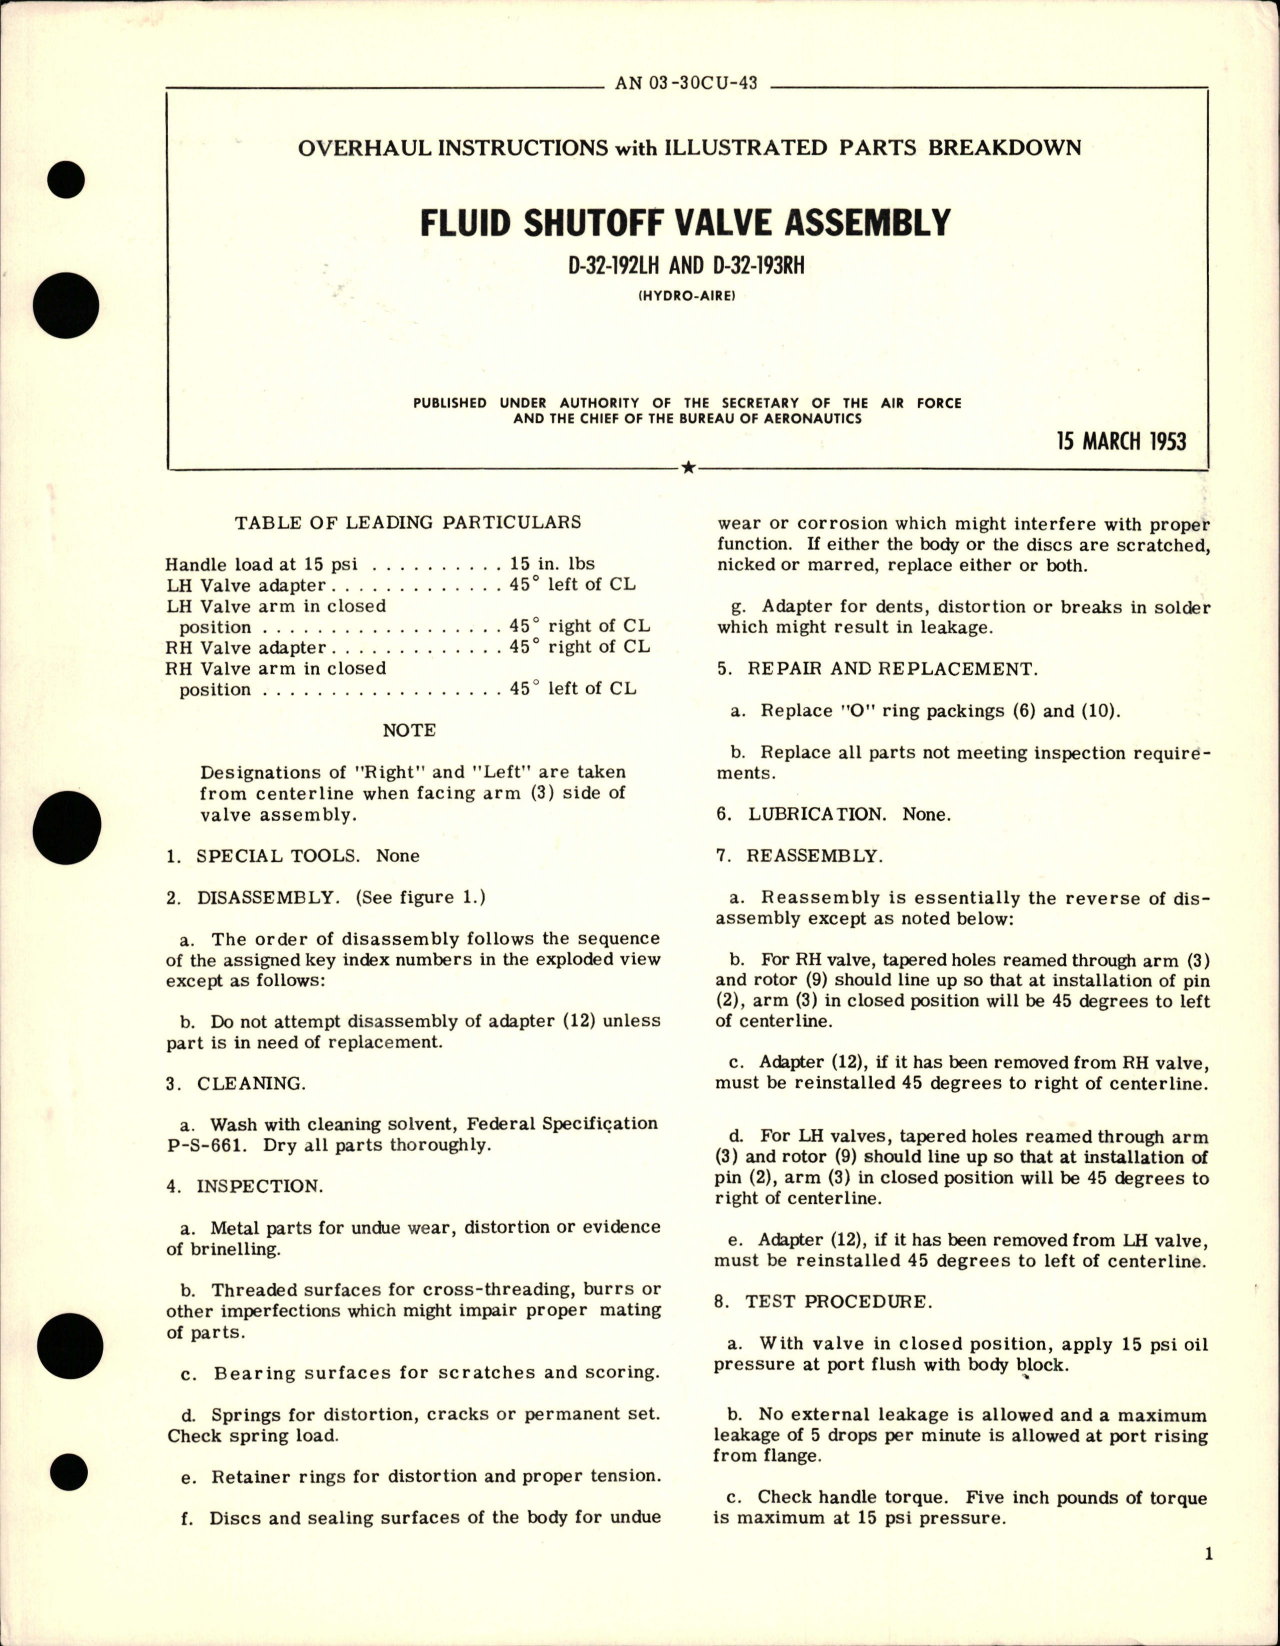 Sample page 1 from AirCorps Library document: Overhaul Instructions with Illustrated Parts Breakdown for Fluid Shutoff Valve Assembly - D-32-192LH and D-32-193RH